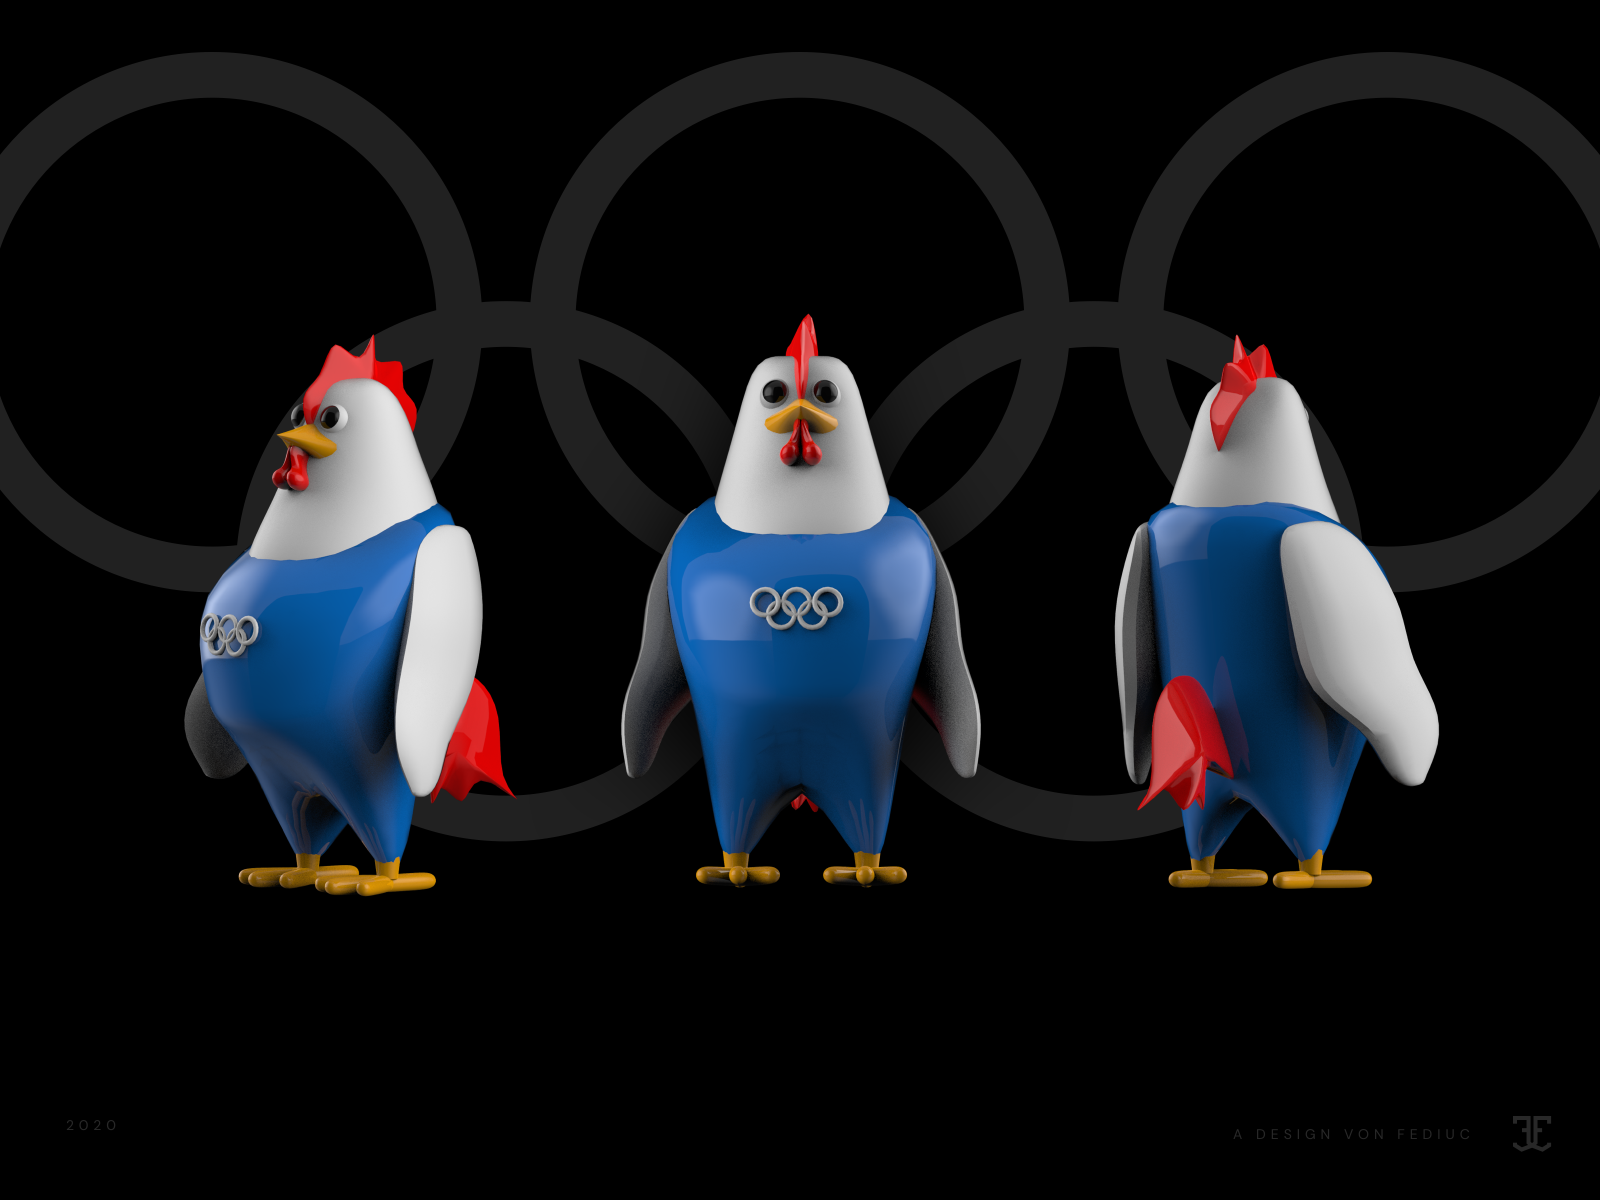 Mascot concept for Olympics, Paris 2024 by Fediuc on Dribbble